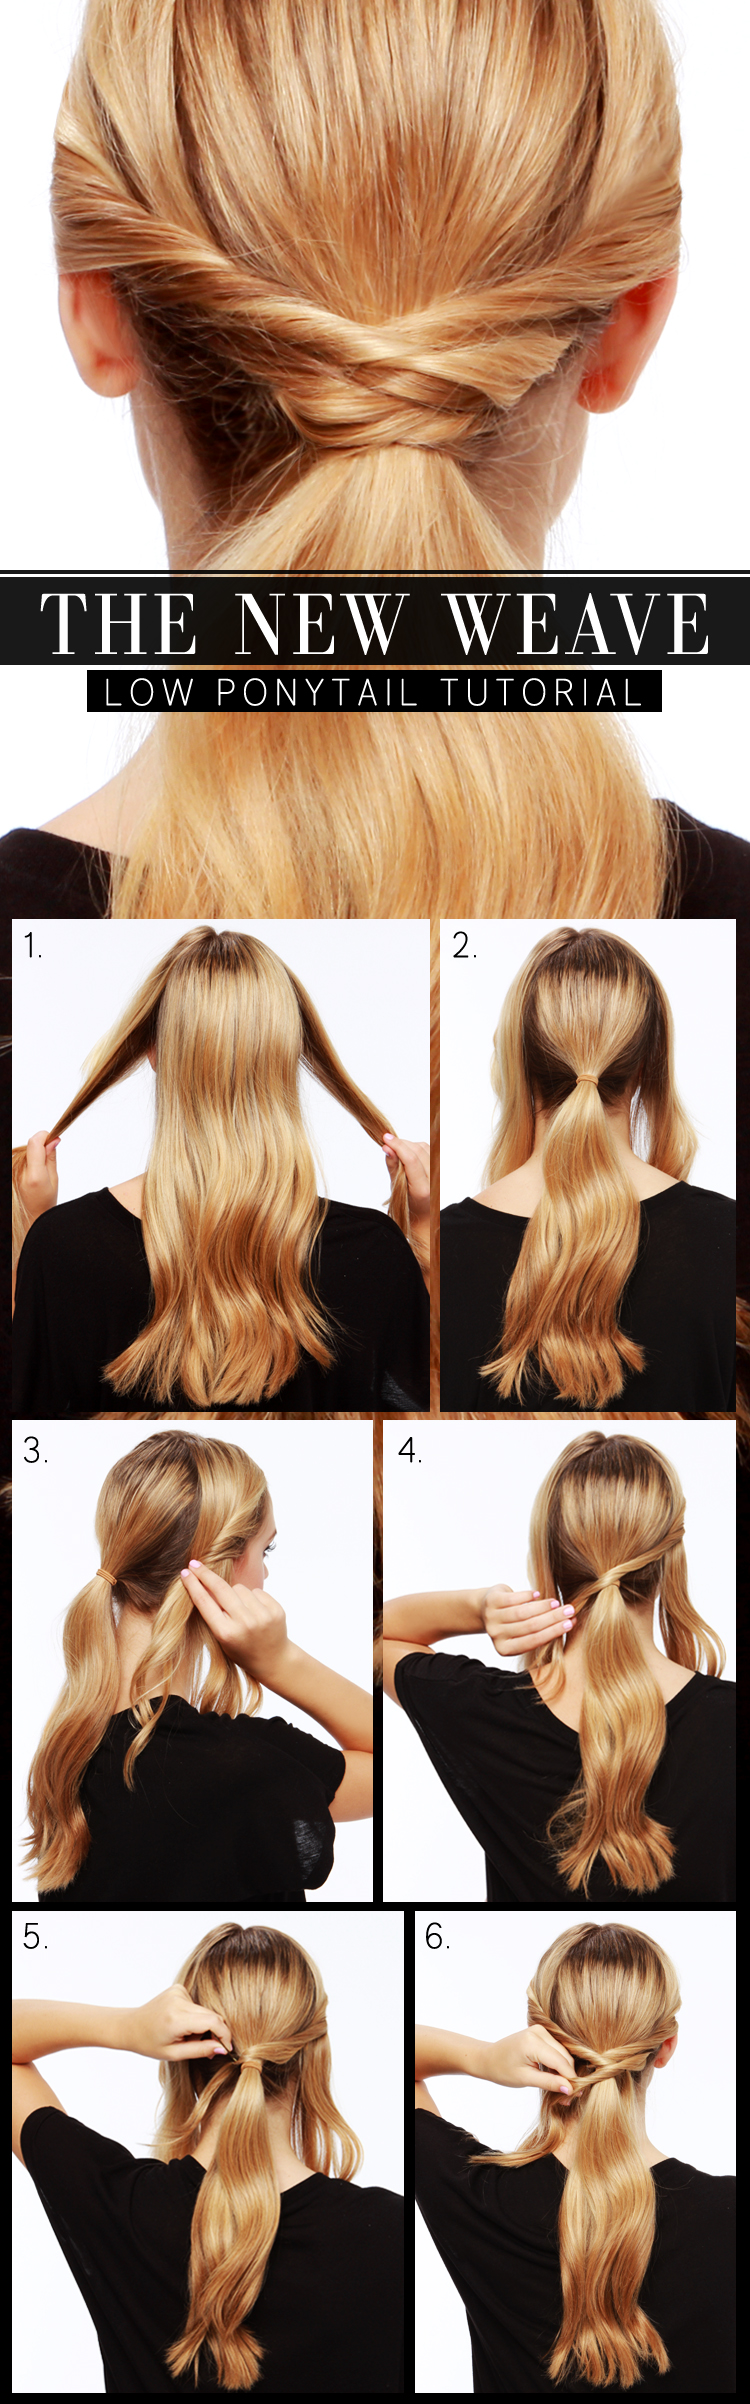 Low Woven Ponytail Tutorial